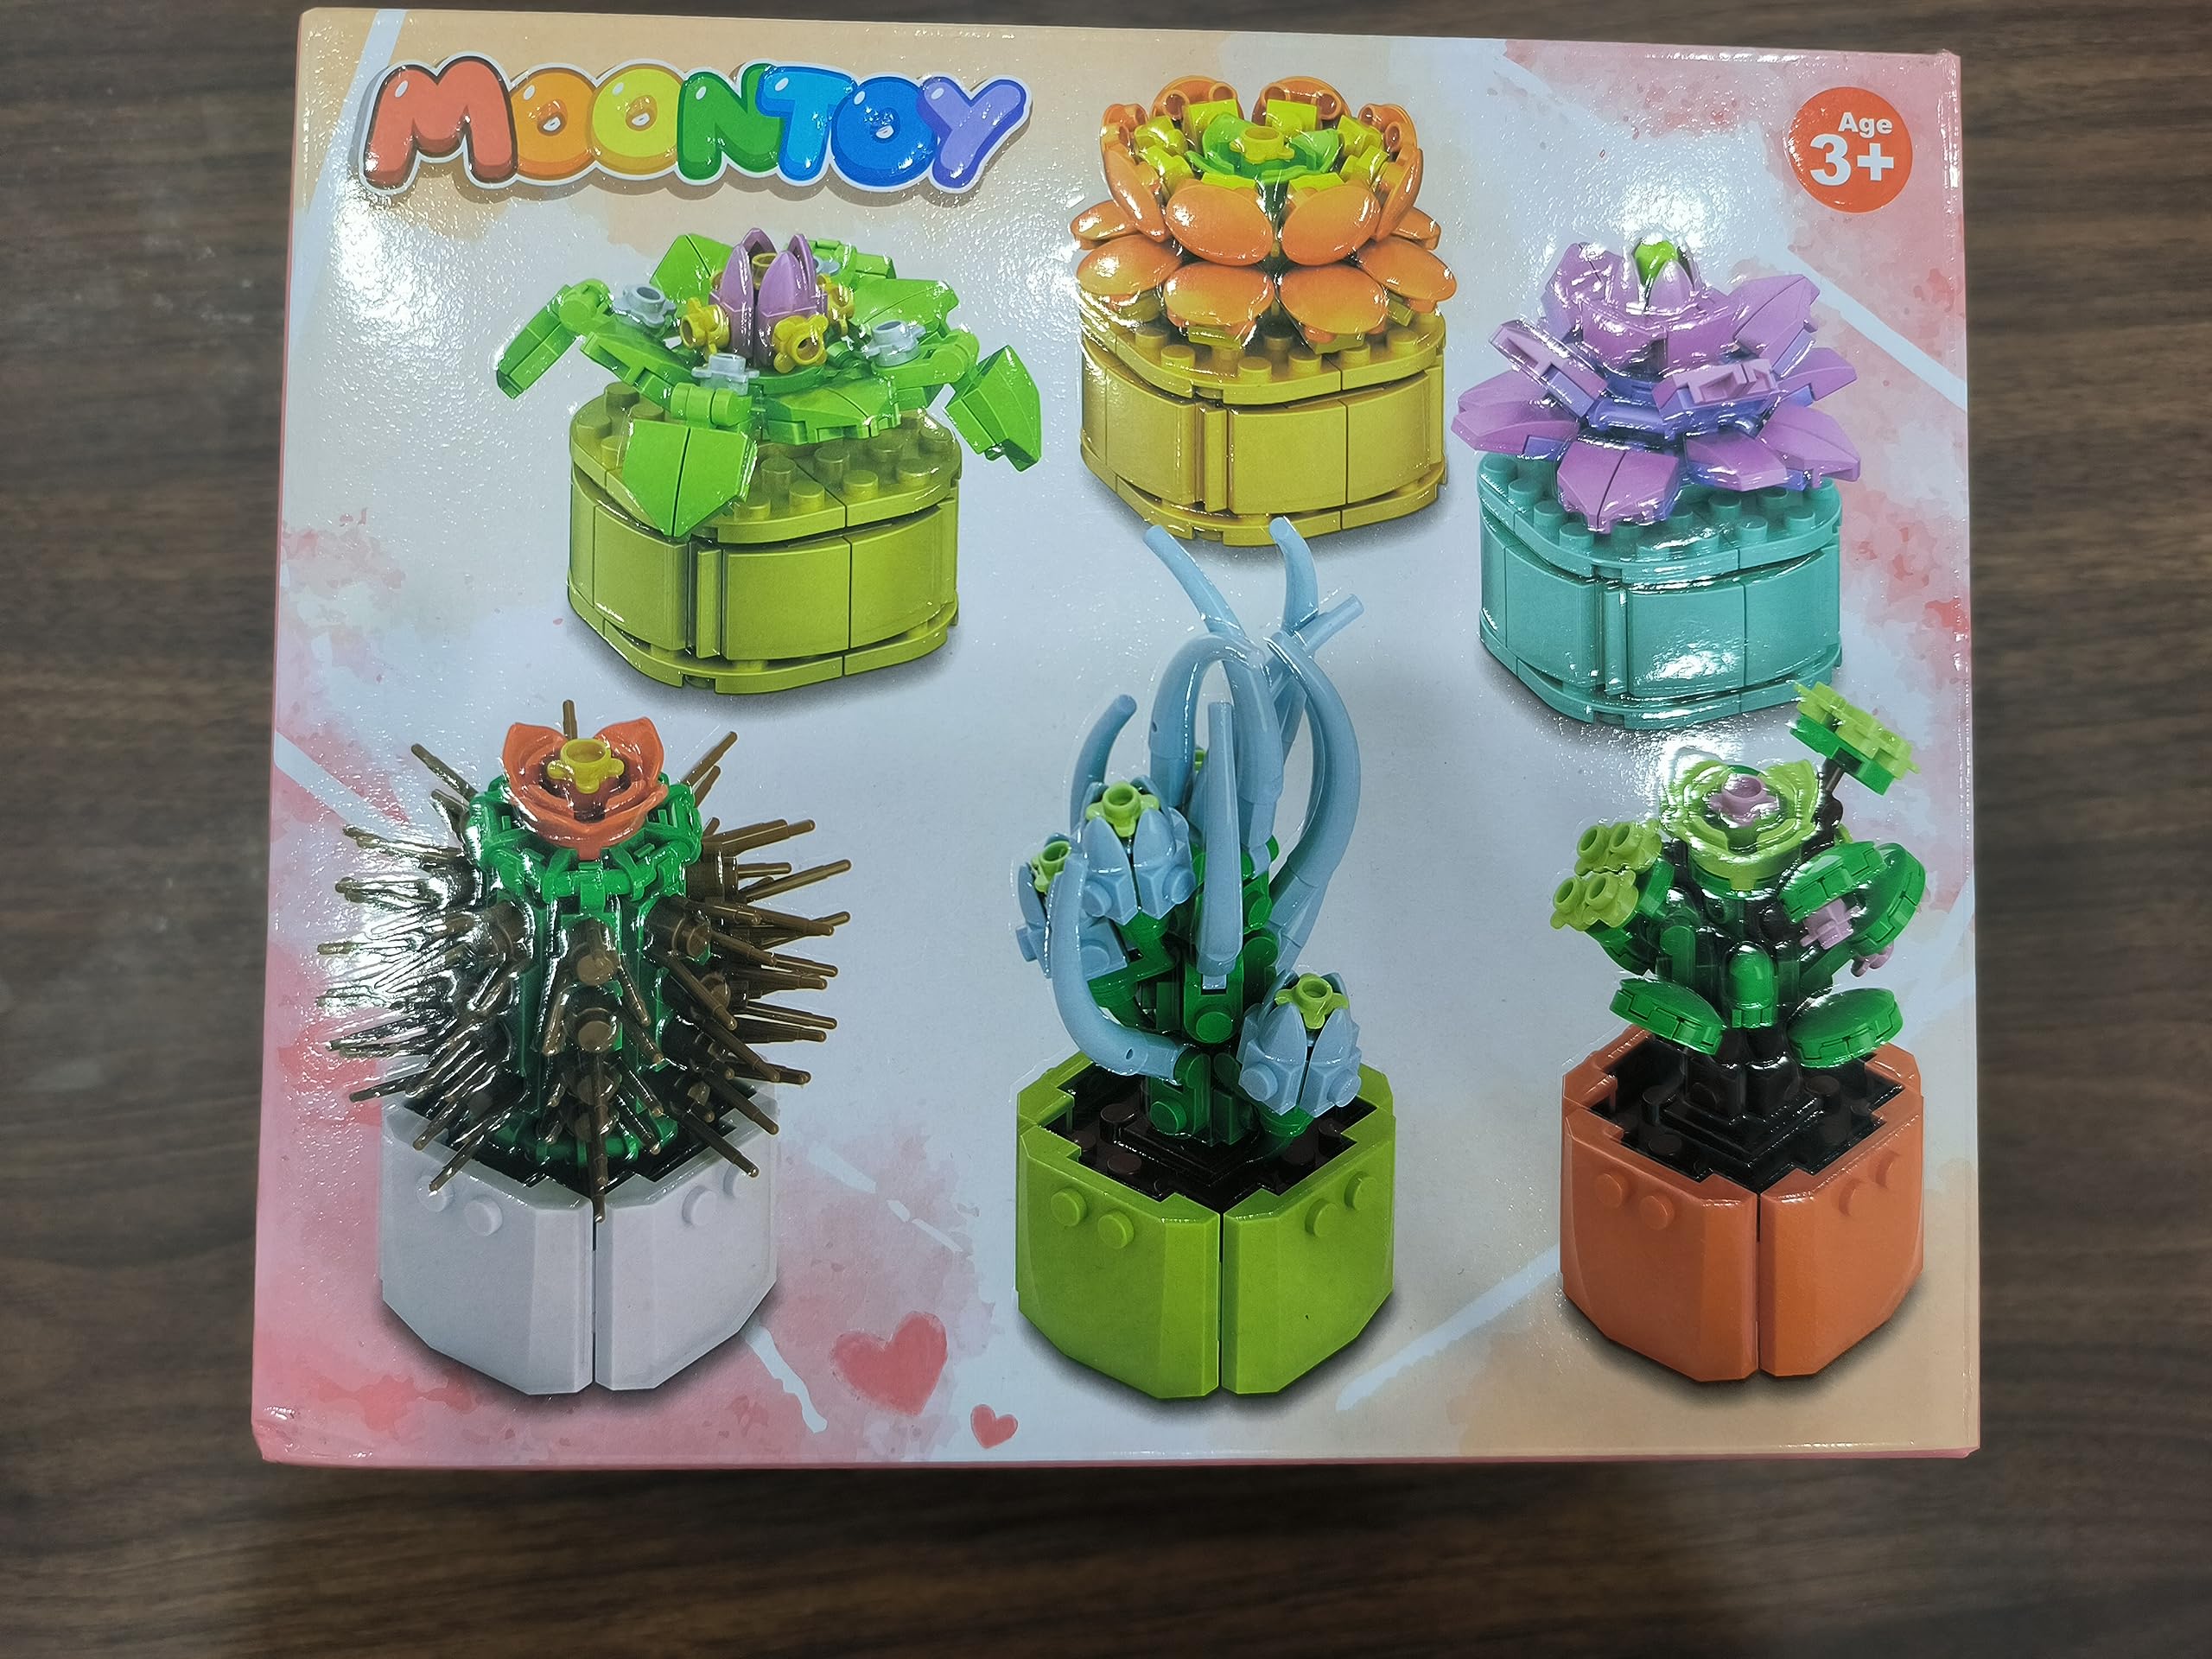 MOONTOY Succulents Artificial Plants Set Building Blocks Toys, 6 Packs Birthday Gifts for Adults Kids, Succulent Botanical Collection Flower Bouquet Kit Home Office Decor Bonsai Creative Gift (521PCS)